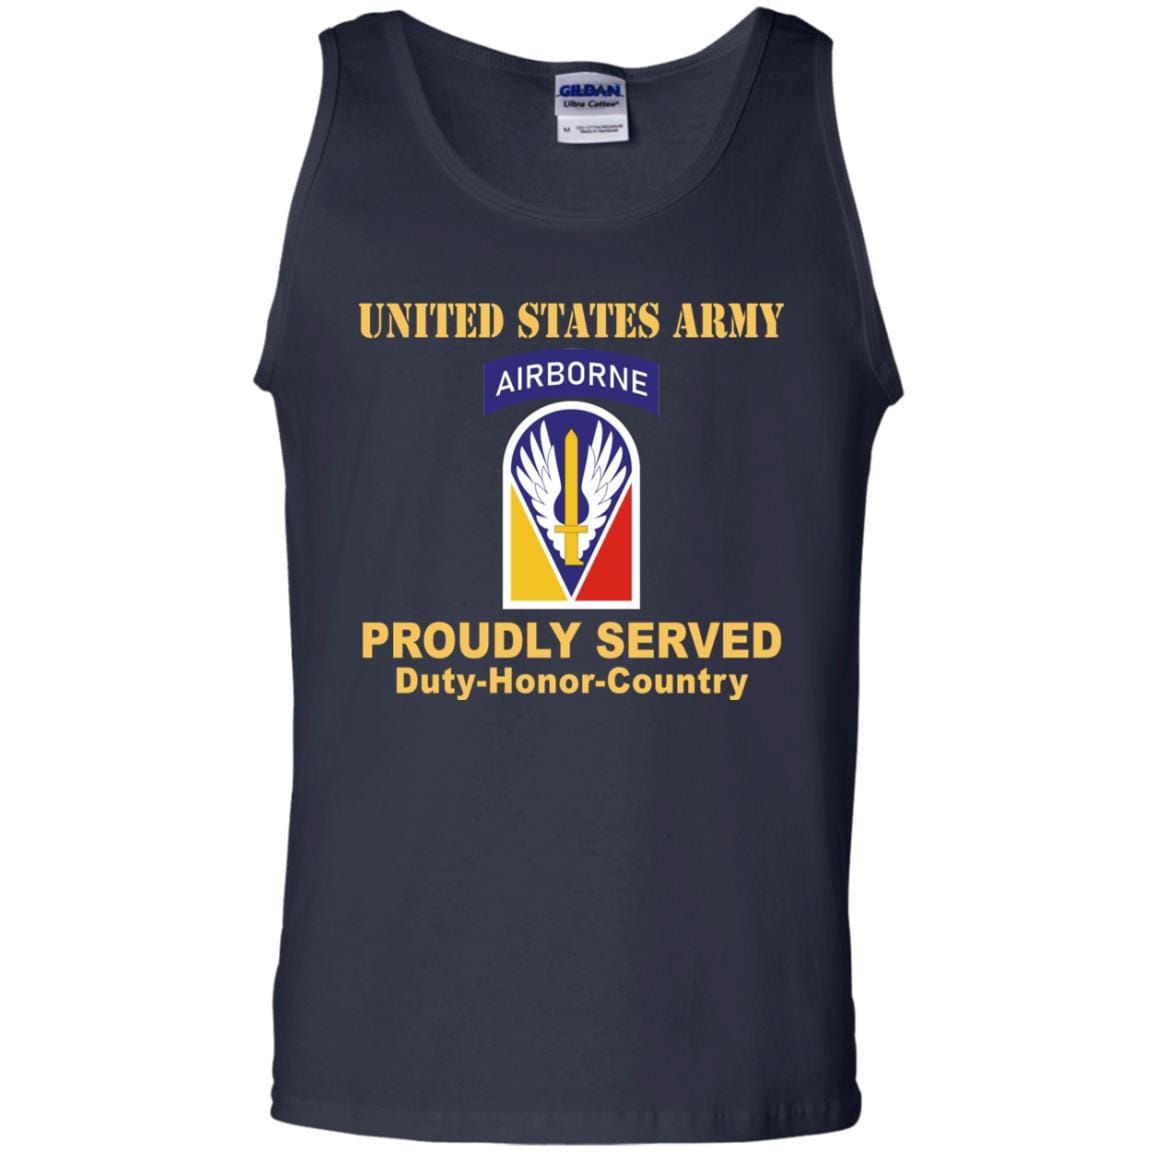 US ARMY CSIB JOINT READINESS TRAINING CENTER- Proudly Served T-Shirt On Front For Men-TShirt-Army-Veterans Nation